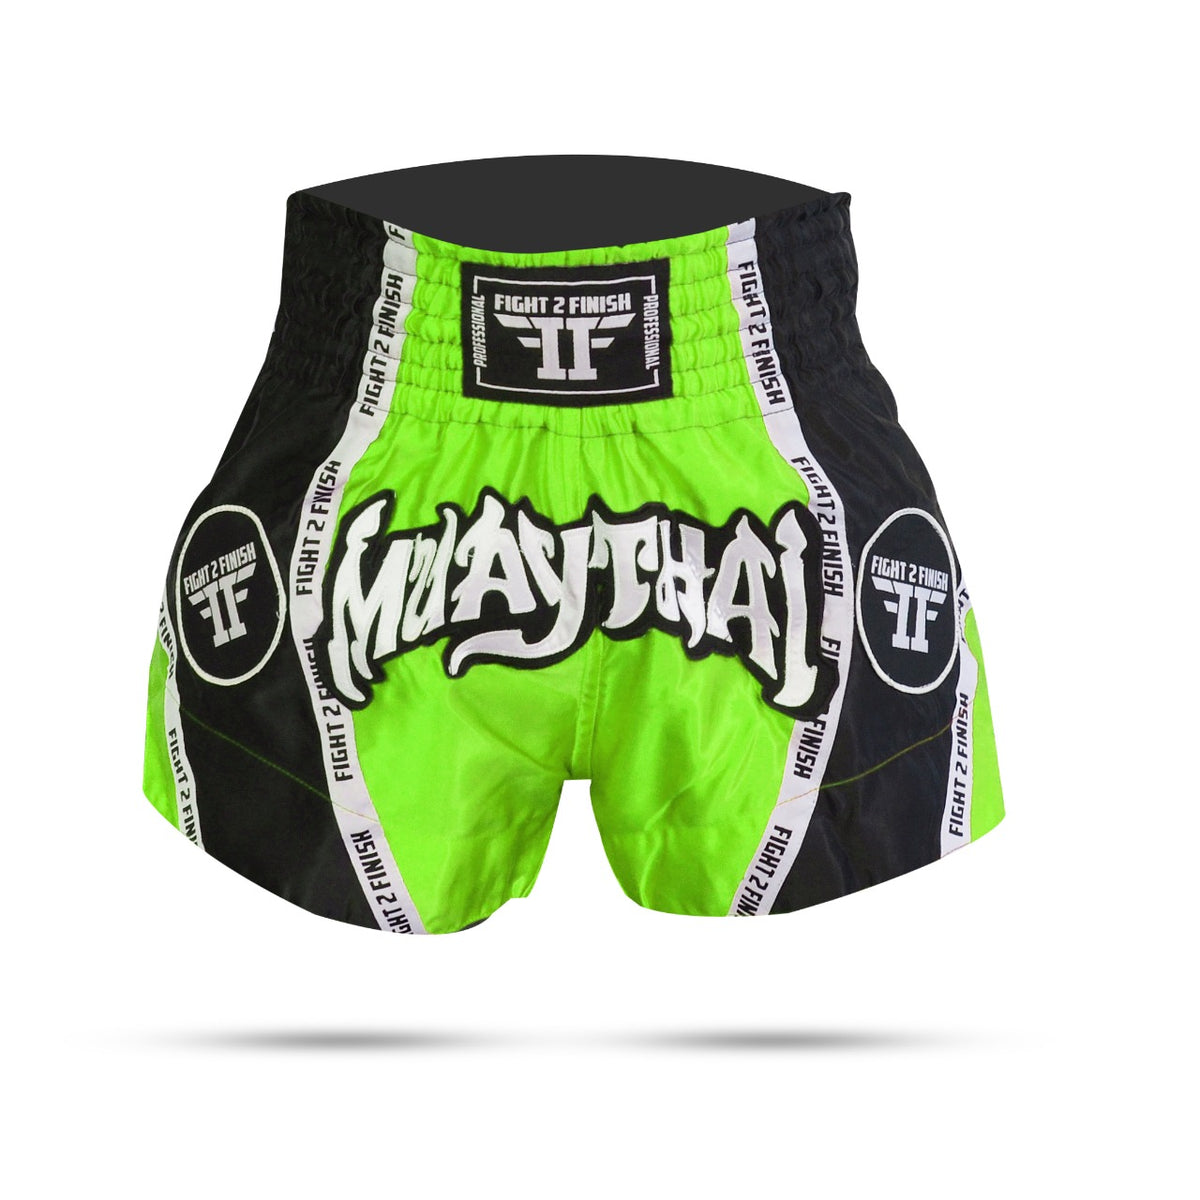 Wicked1 Muay Thai Shorts Review - Fight Quality